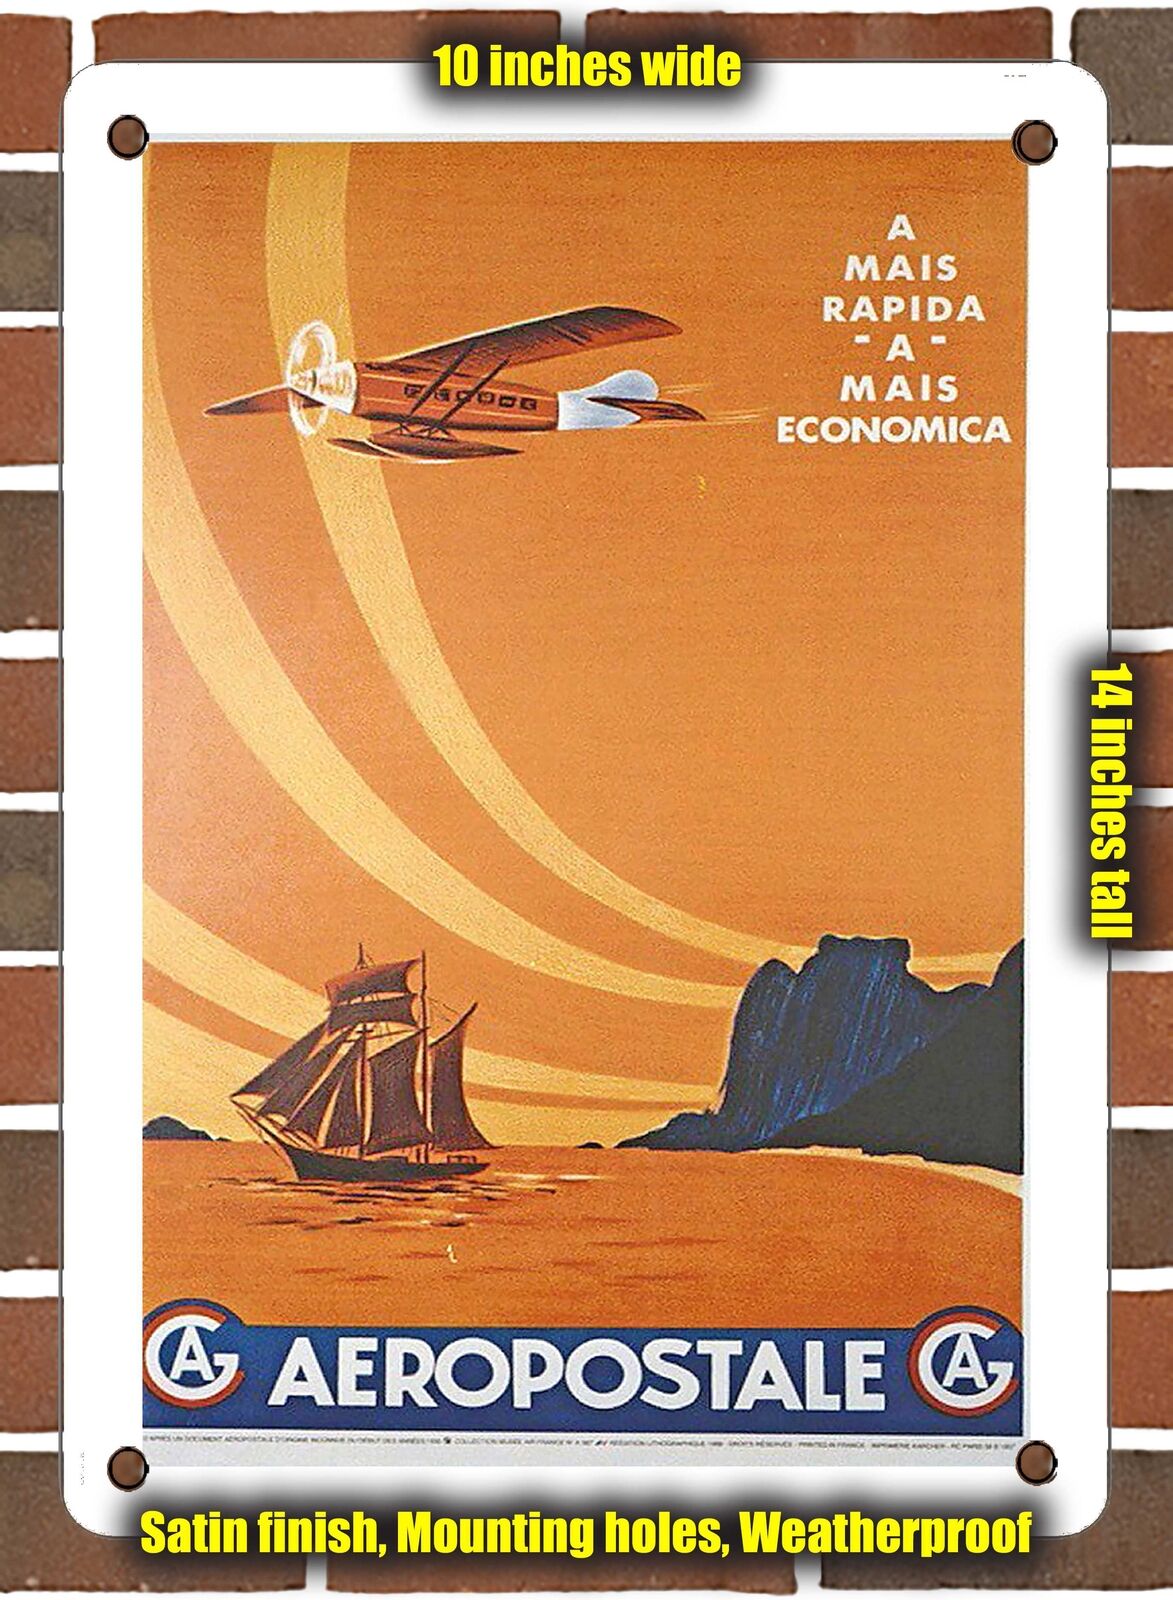 METAL SIGN - 1930 The Fastest, The Most Economical Aeropost - 10x14 Inches